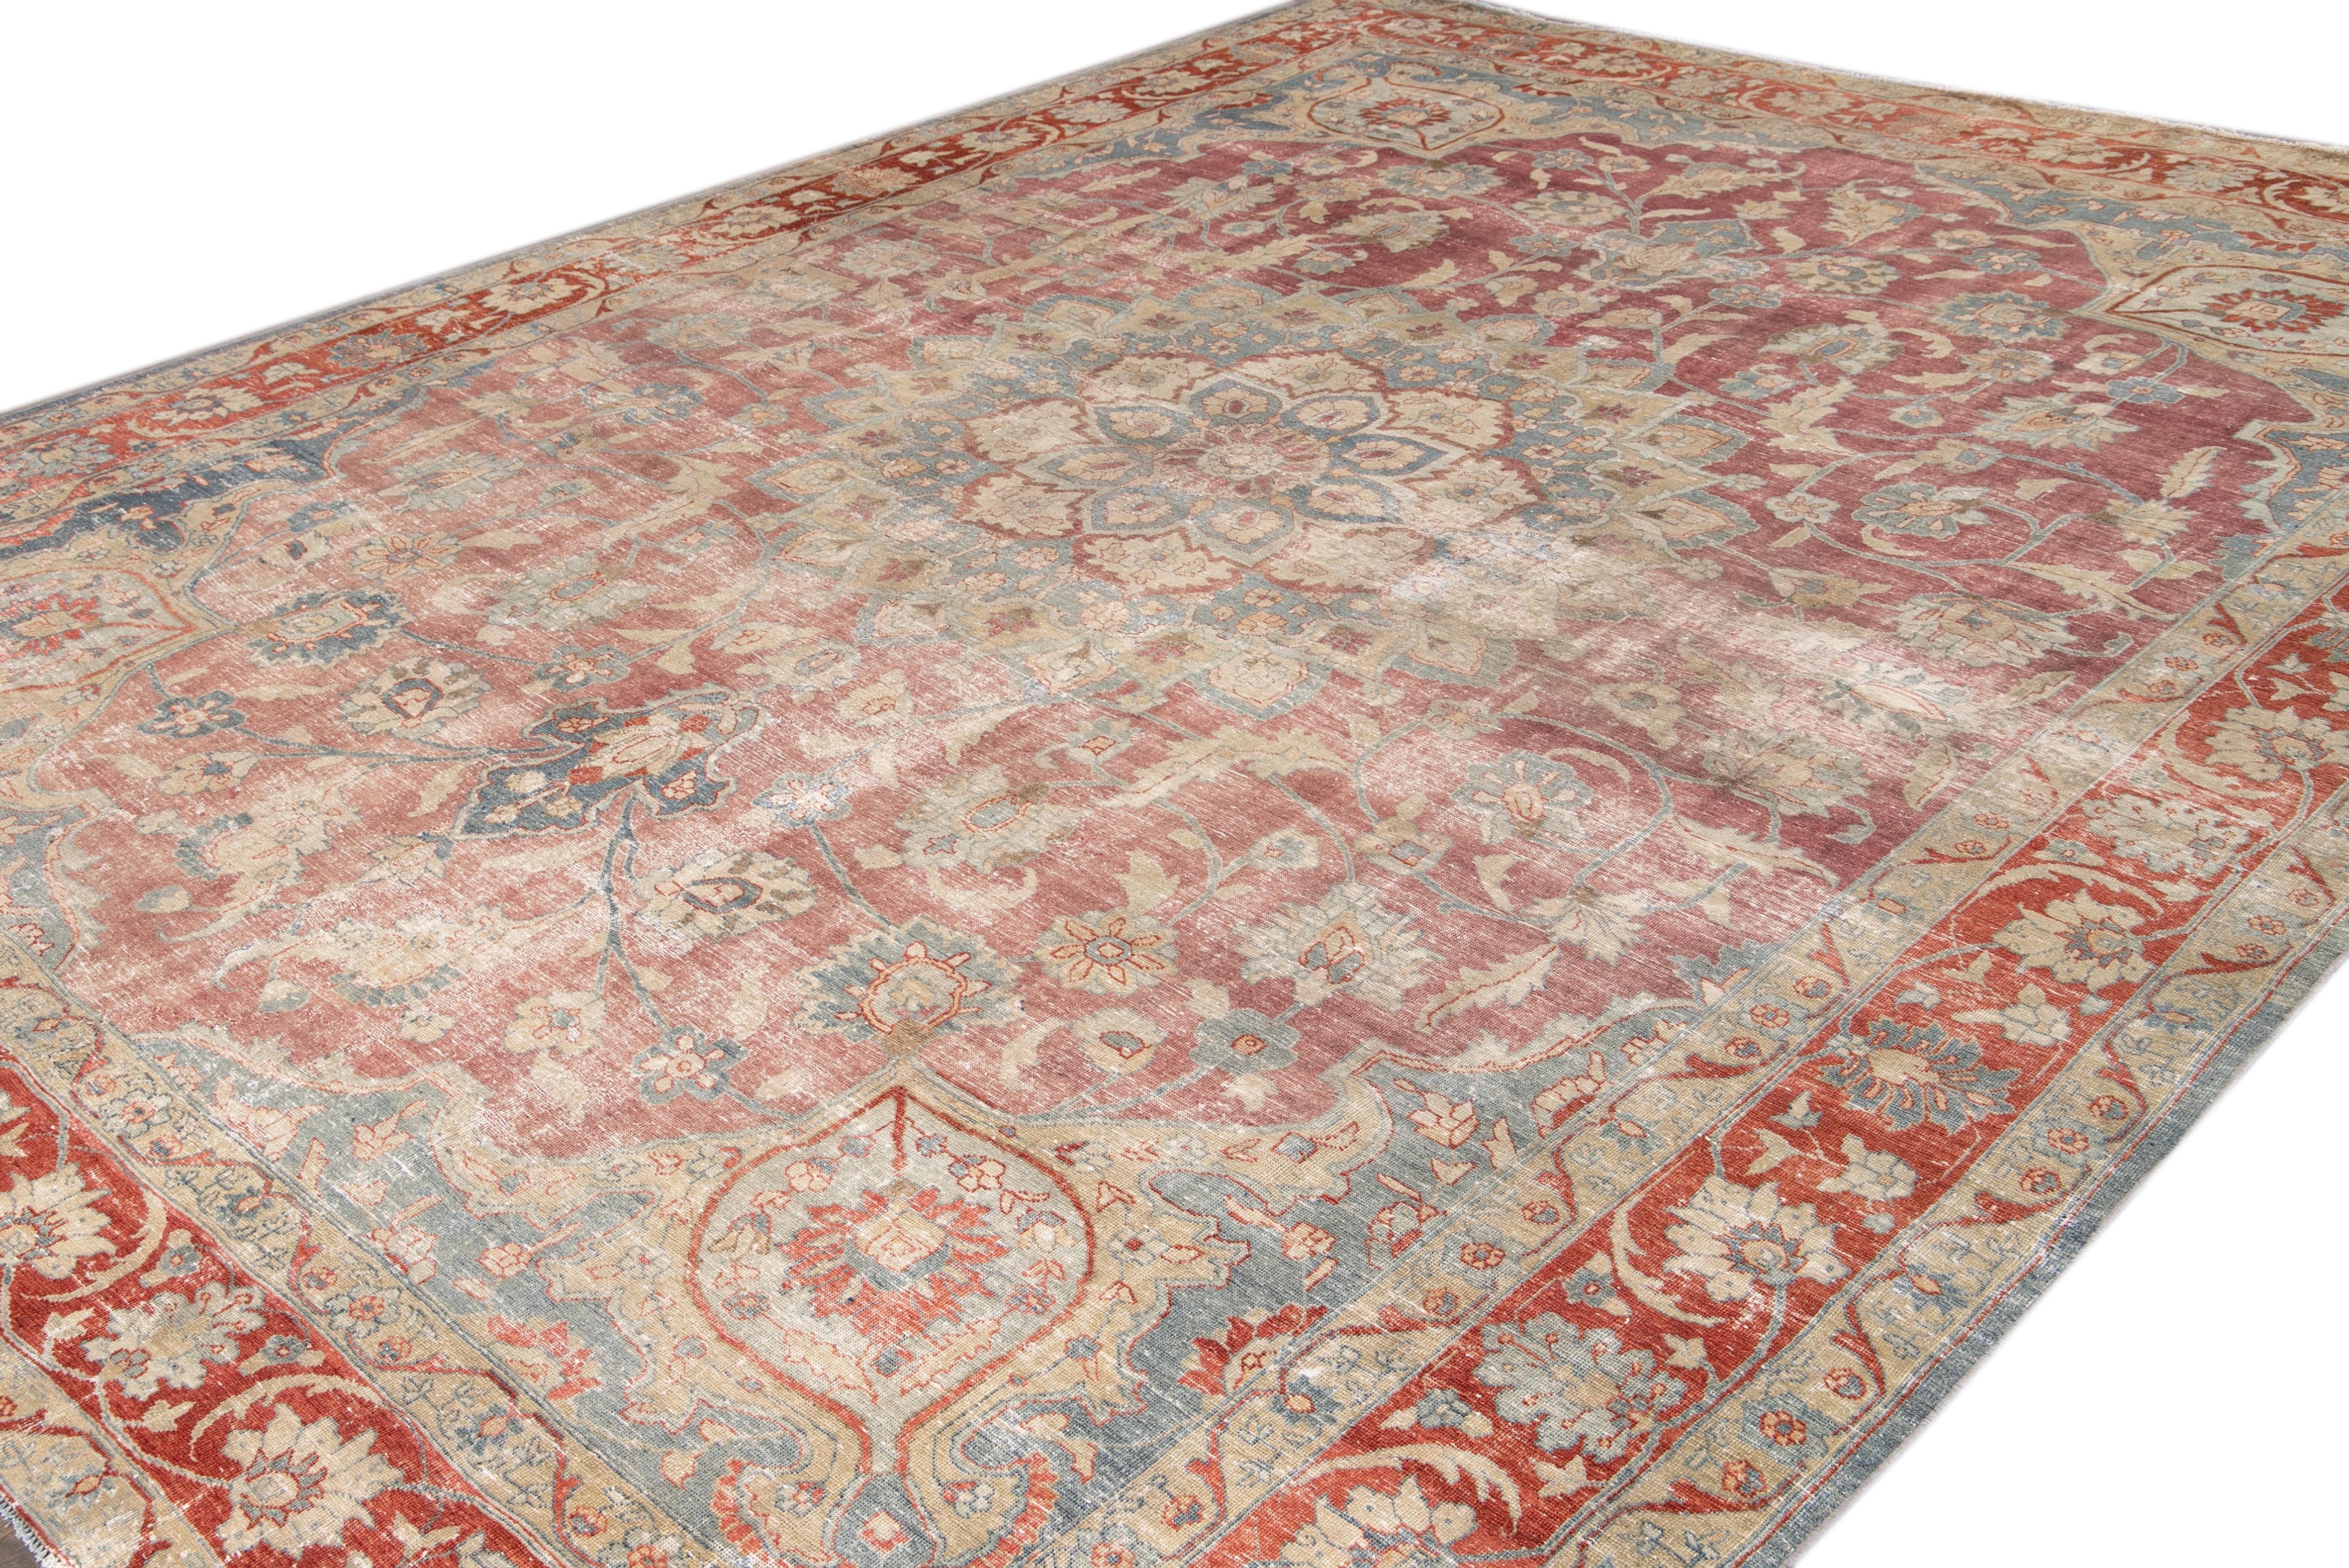 20th Century Antique Persian Tabriz Red and Blue Handmade Medallion Floral Wool Rug For Sale